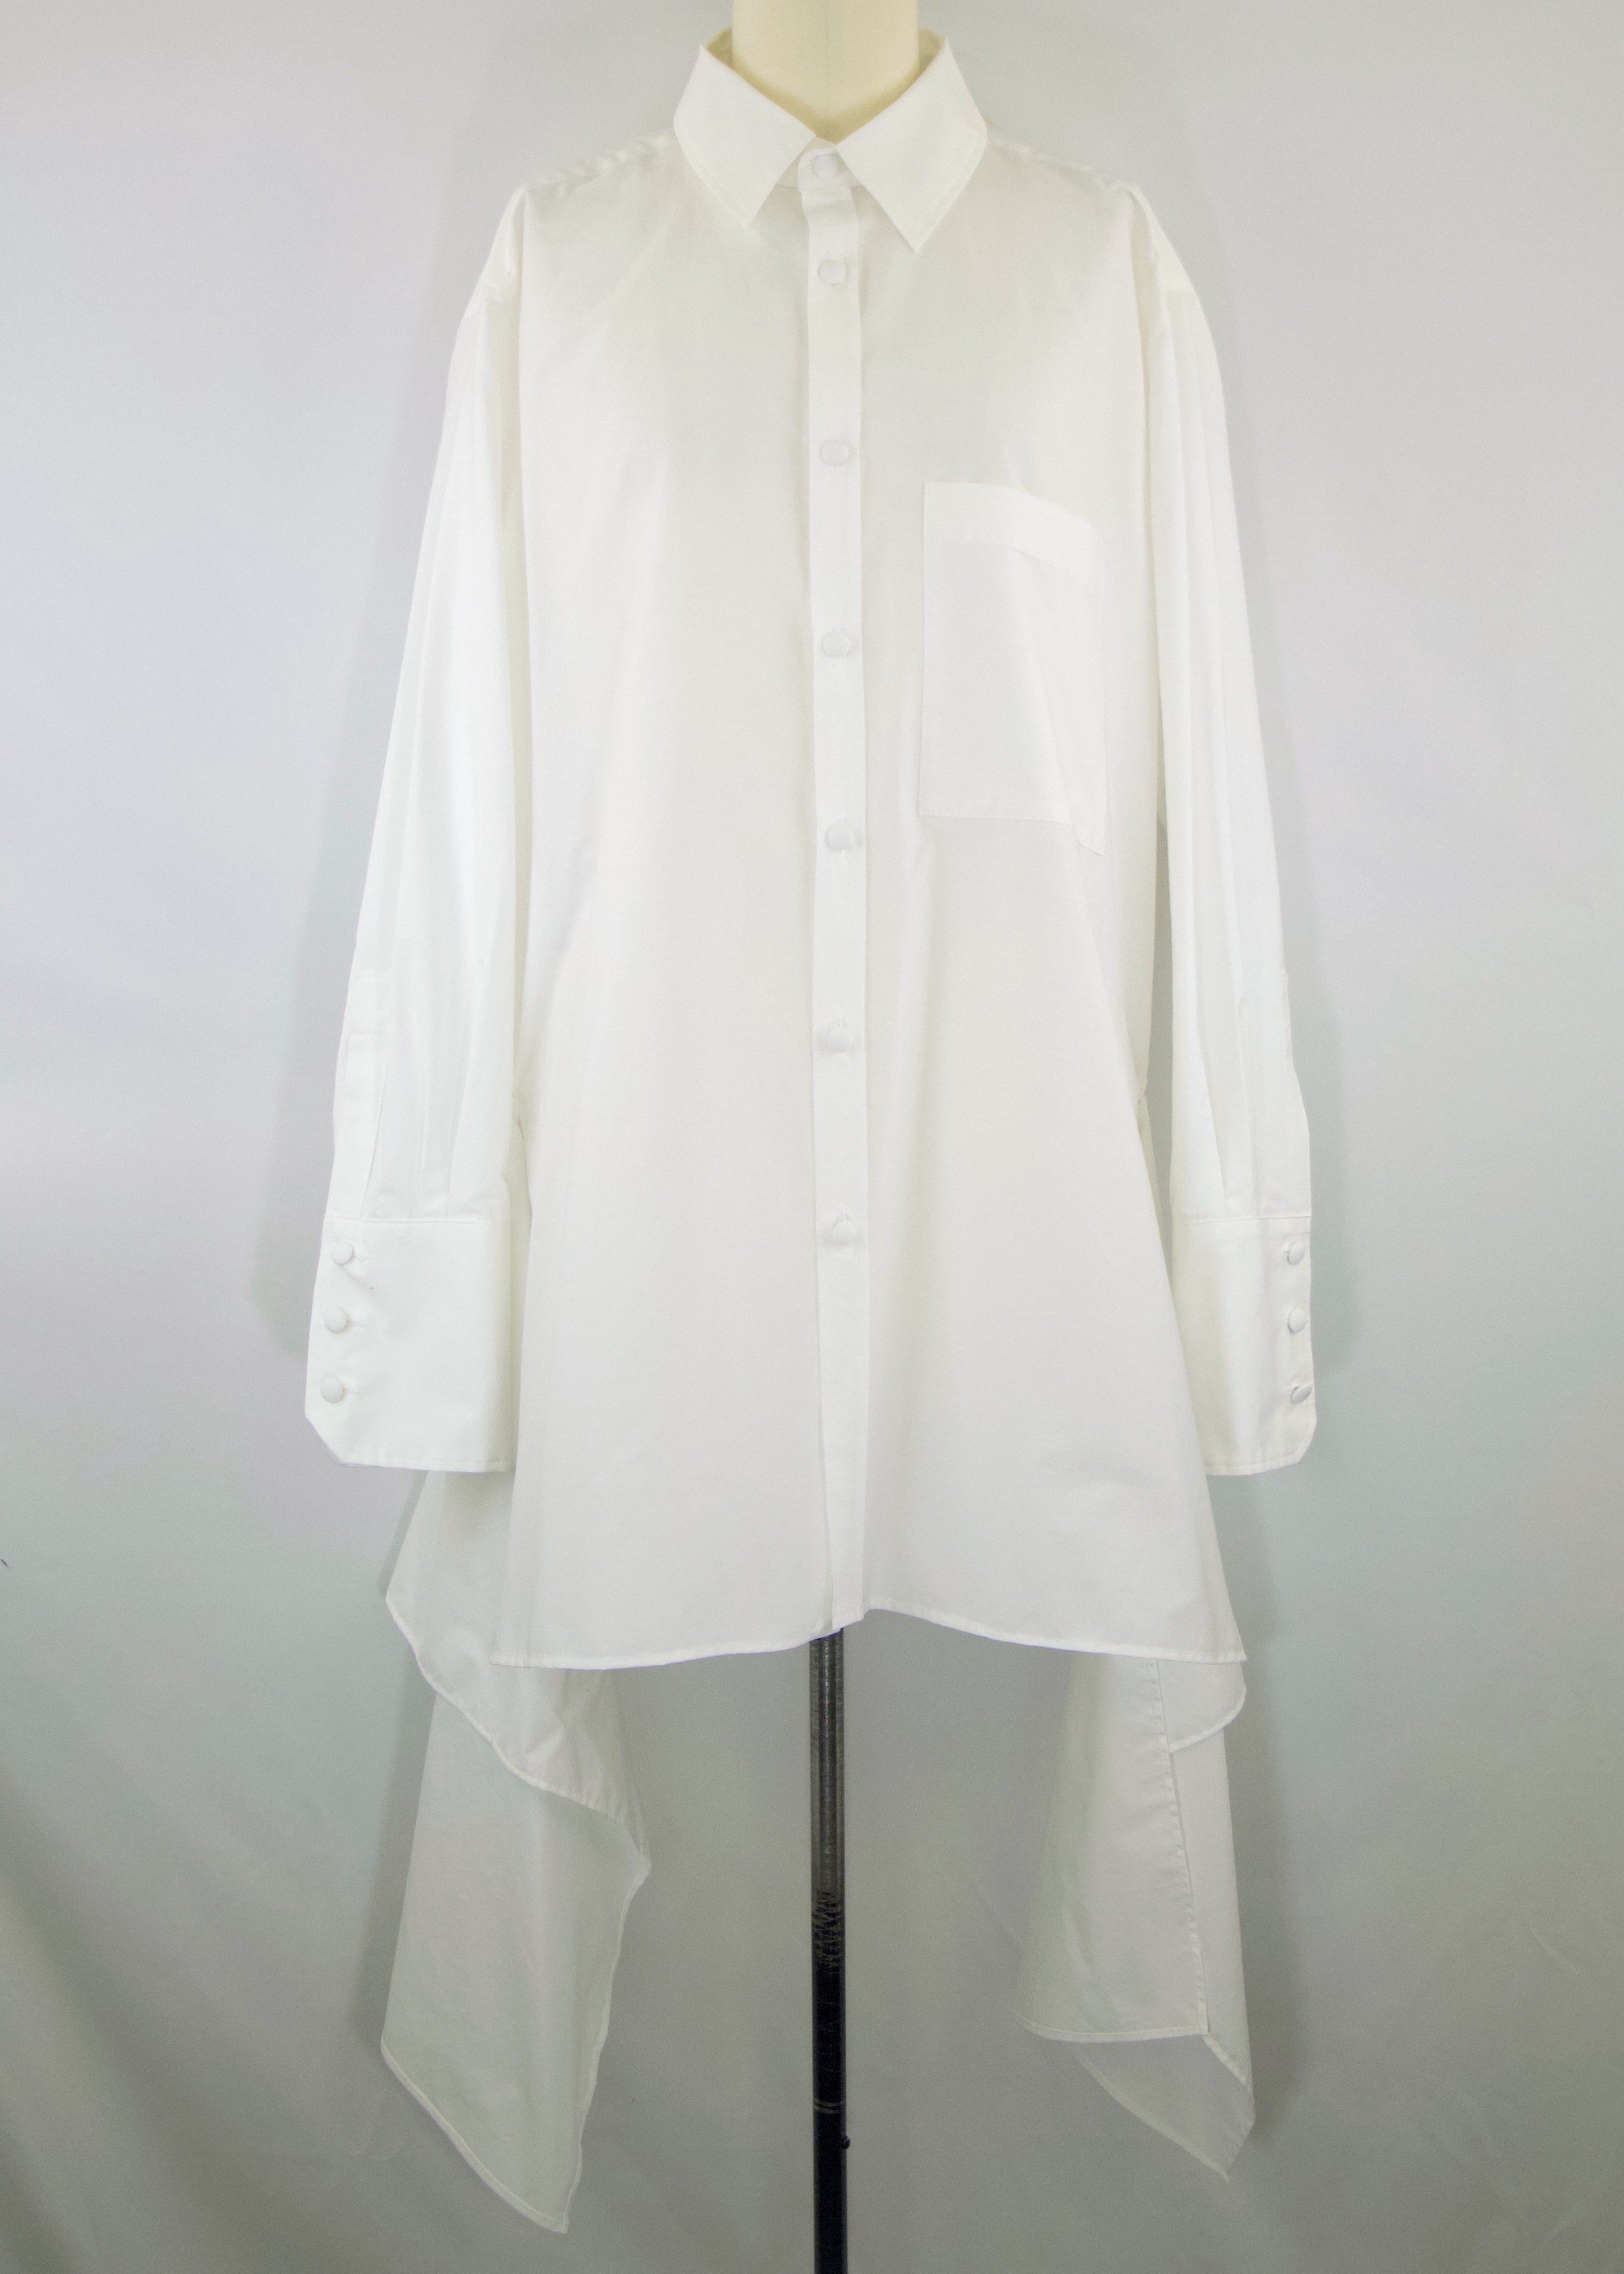 <img class='new_mark_img1' src='https://img.shop-pro.jp/img/new/icons10.gif' style='border:none;display:inline;margin:0px;padding:0px;width:auto;' />f's6 original Asymmetry shirt / White